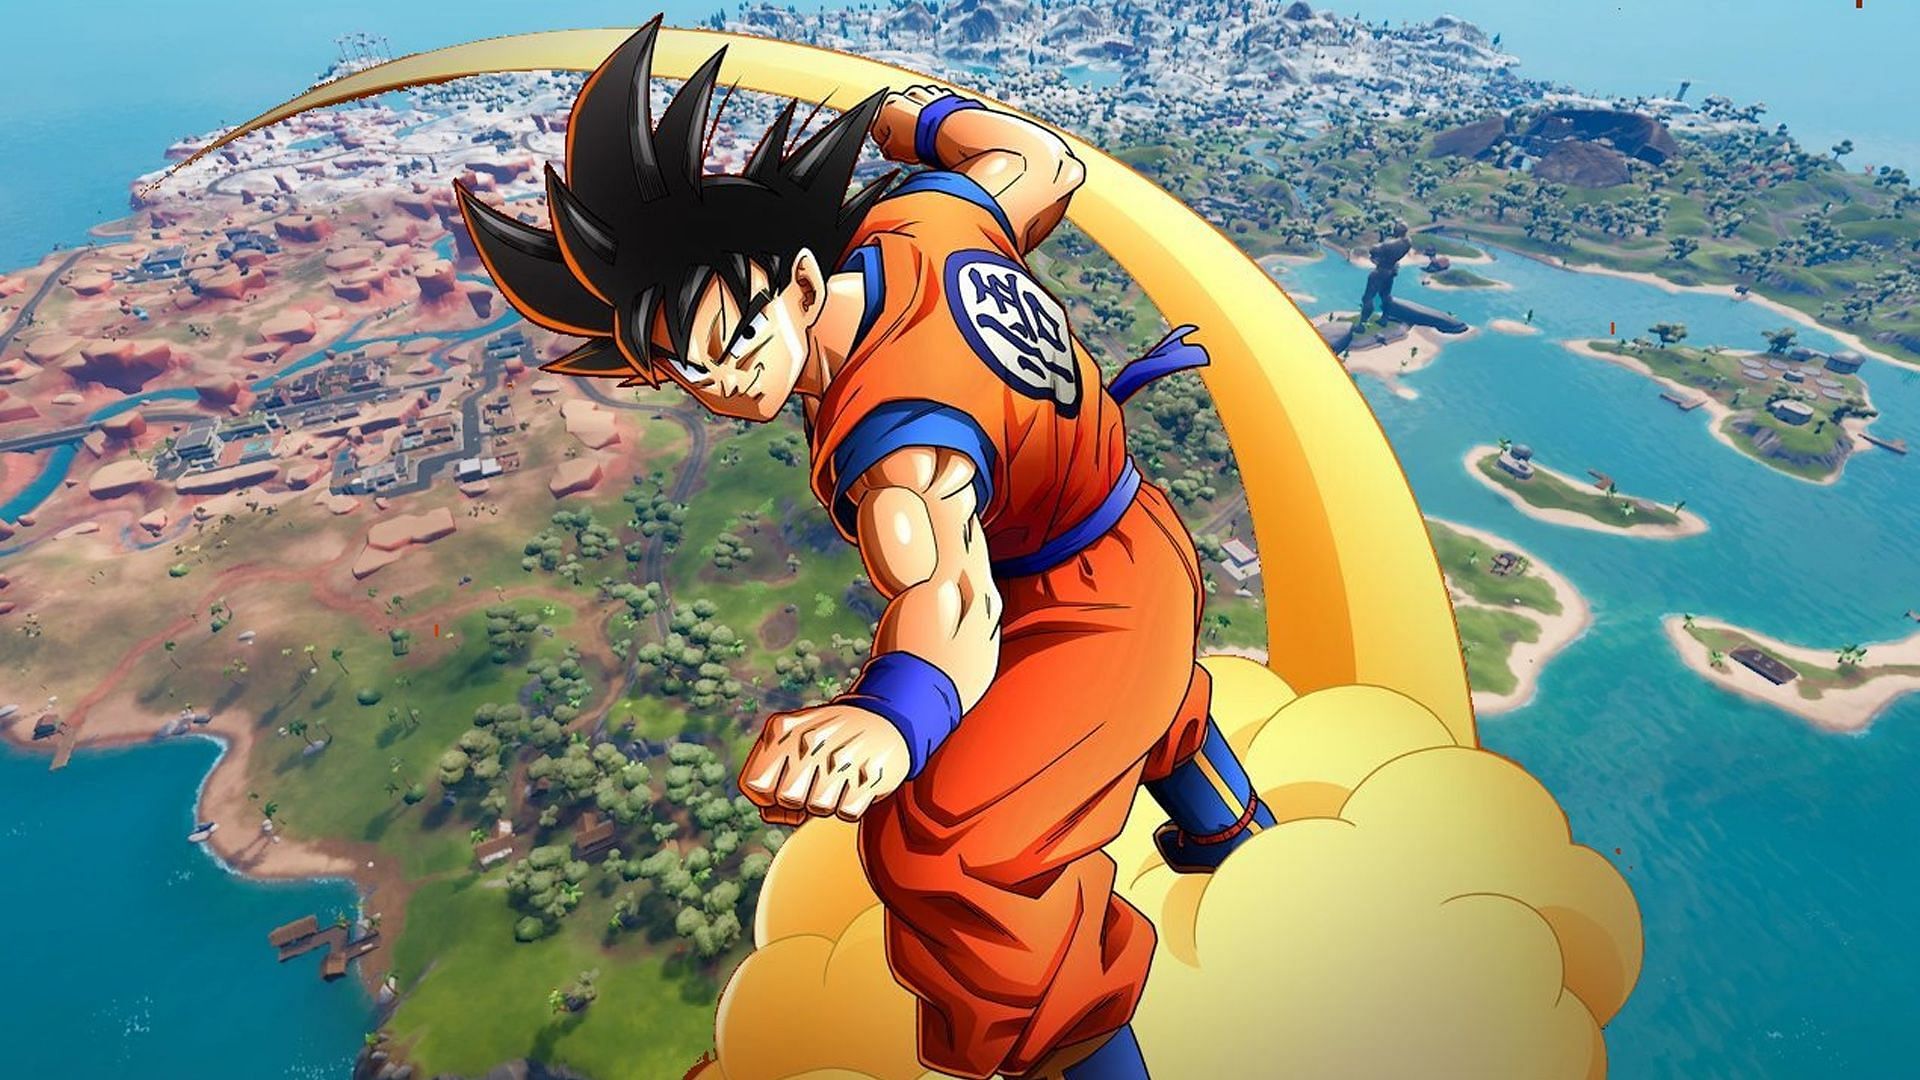 Fortnite x Dragon Ball collaboration release date and skin leaked